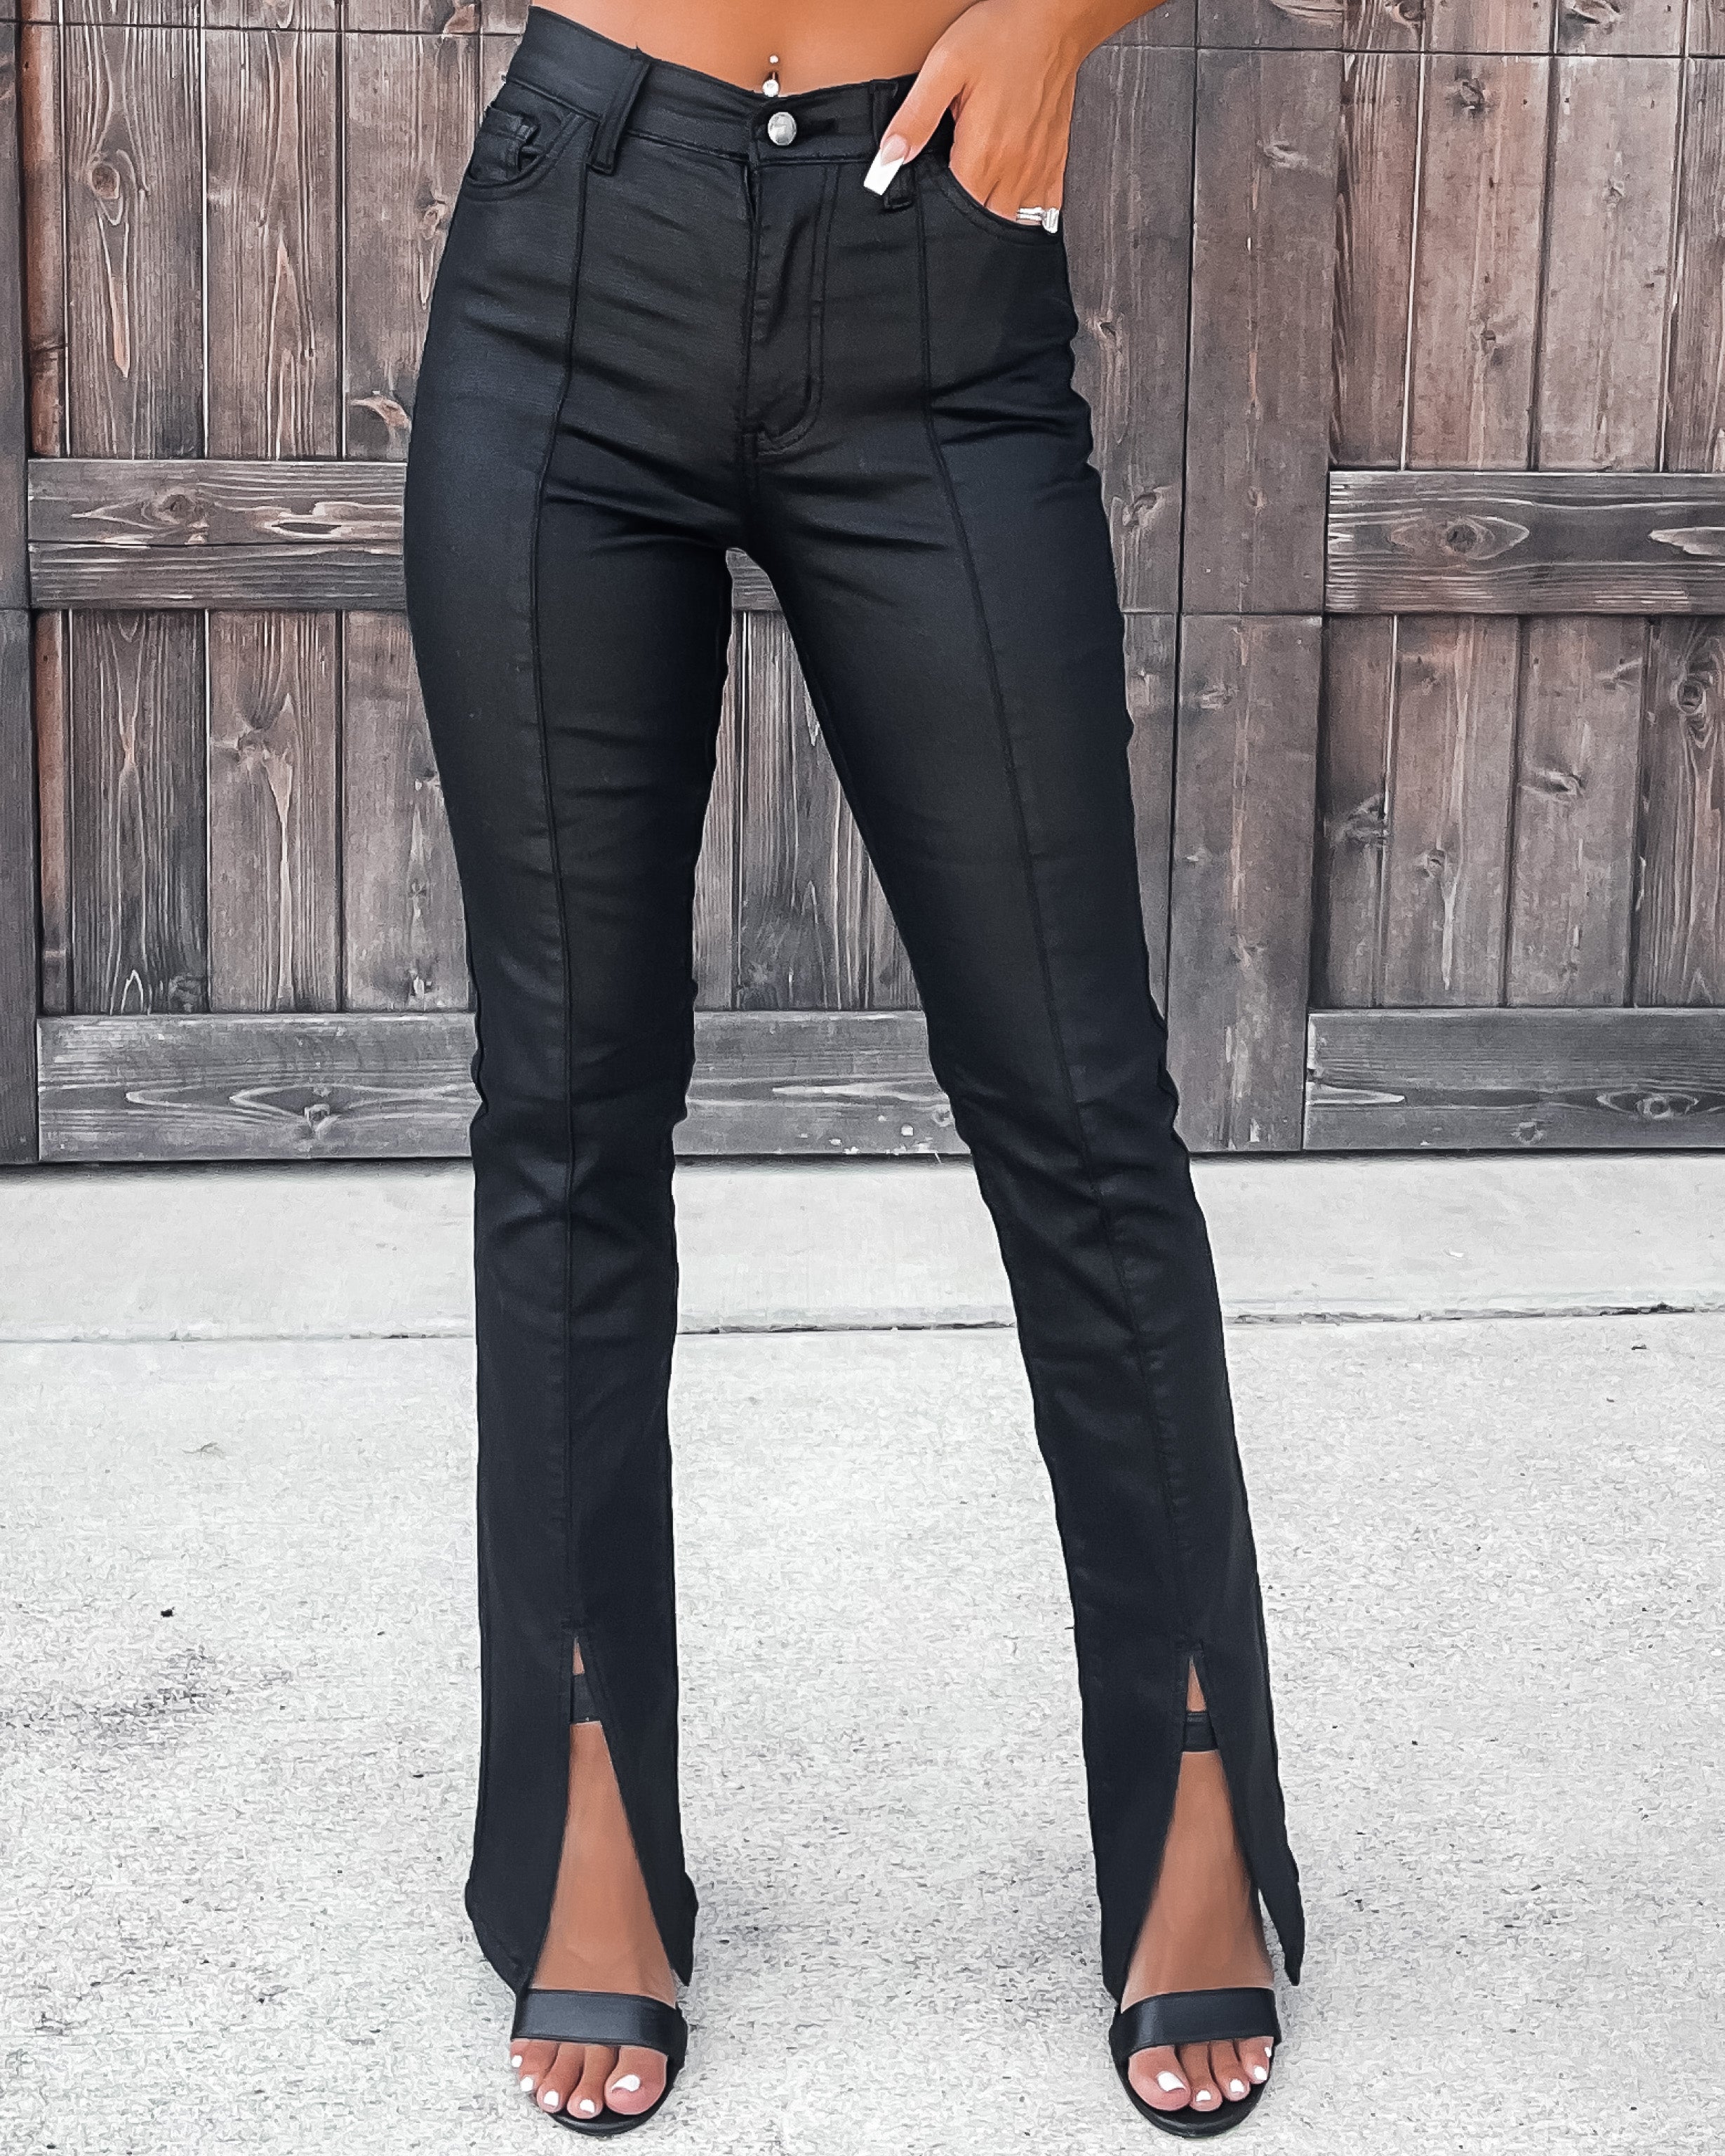 Once In A Lifetime Coated Leather Pleated Slit Pants